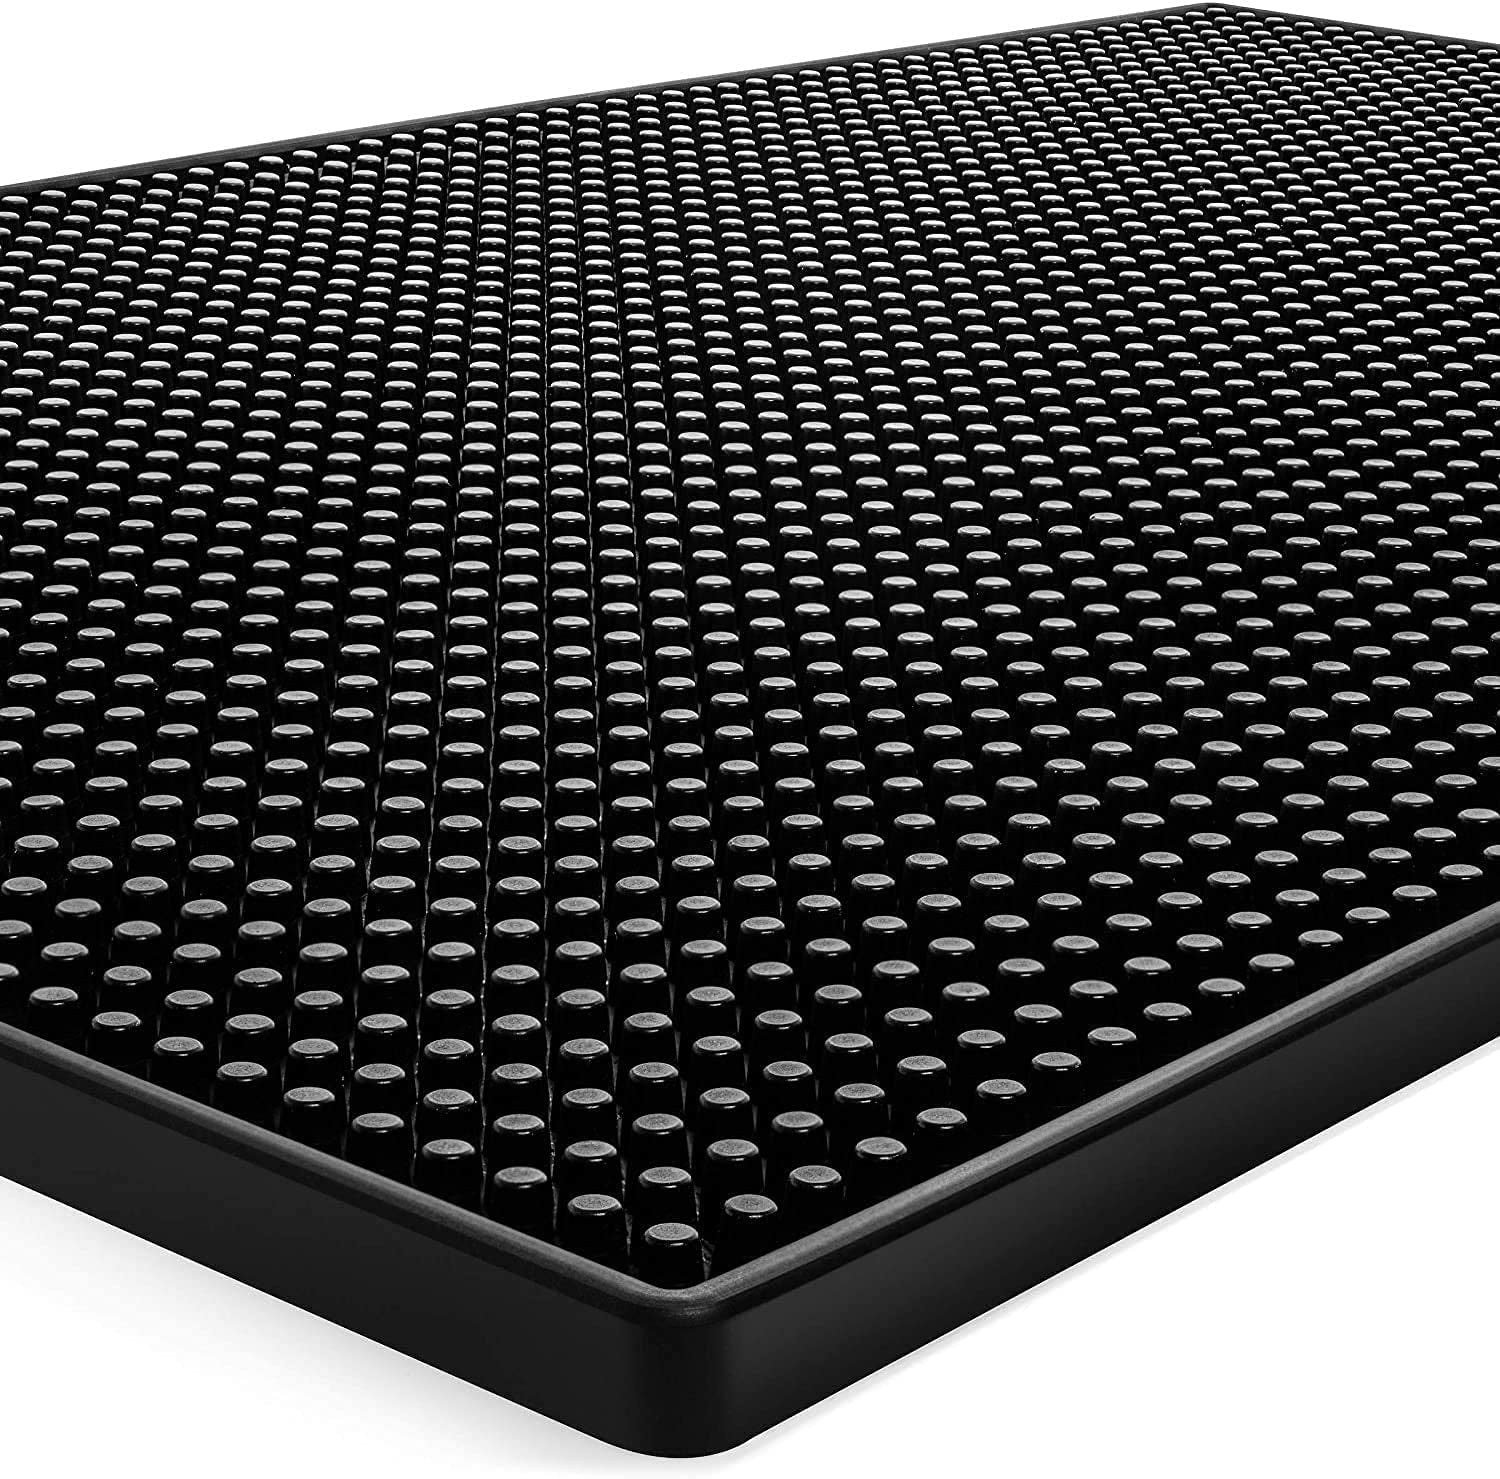 2 Pack Rubber Bar Mat 18 X 12, Thick Durable and Stylish Black Bar Spill Mat. Non Slip, Non-Toxic, Service Mat for Coffee, Bars, Restaurants Counter Top